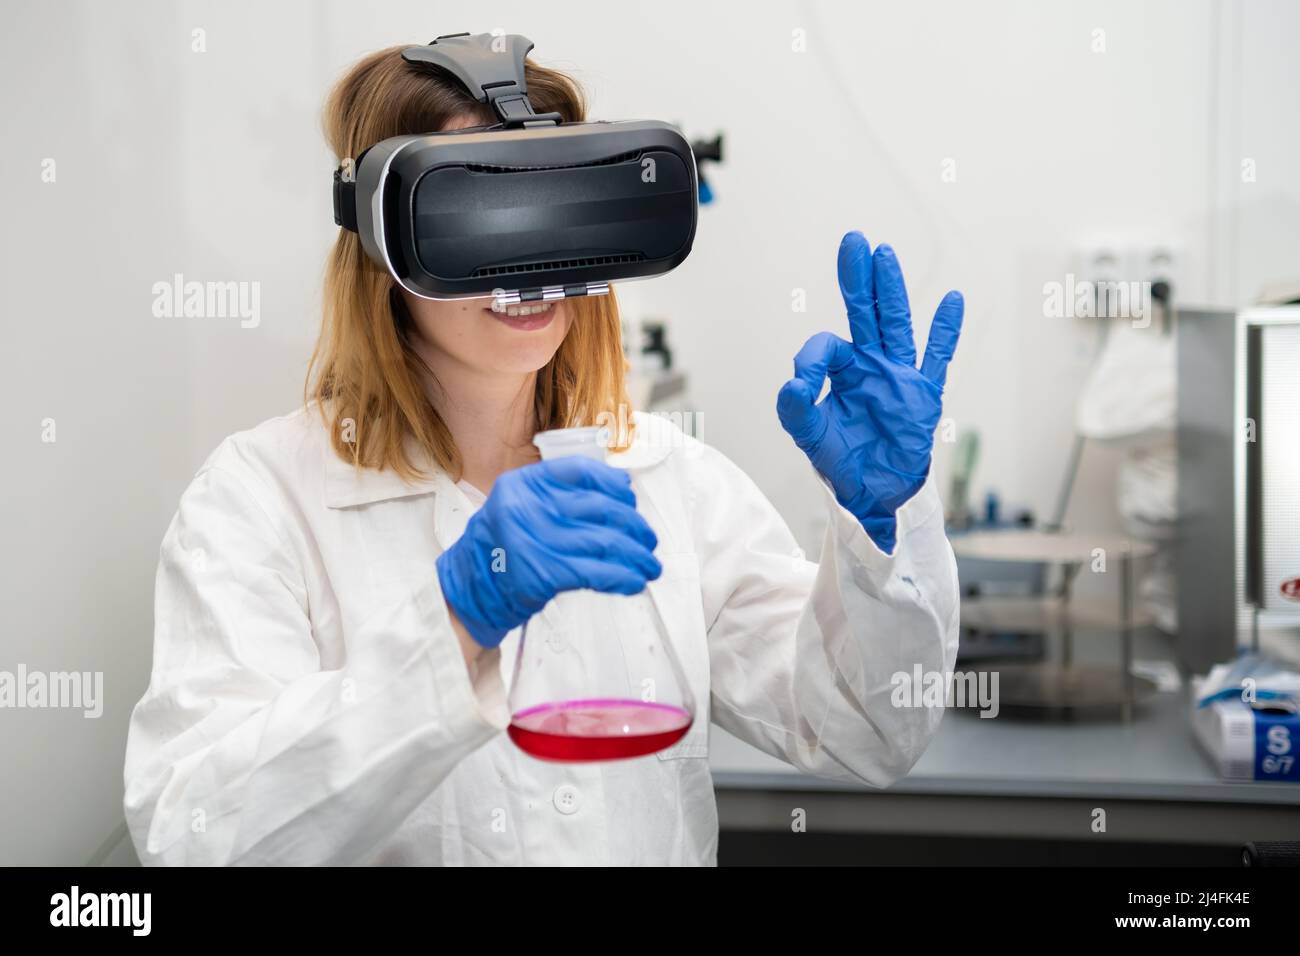 Female scientist show sign OK in VR glass, playing metaverse NFT game. Metaverse virtual world for future science and research.  Stock Photo